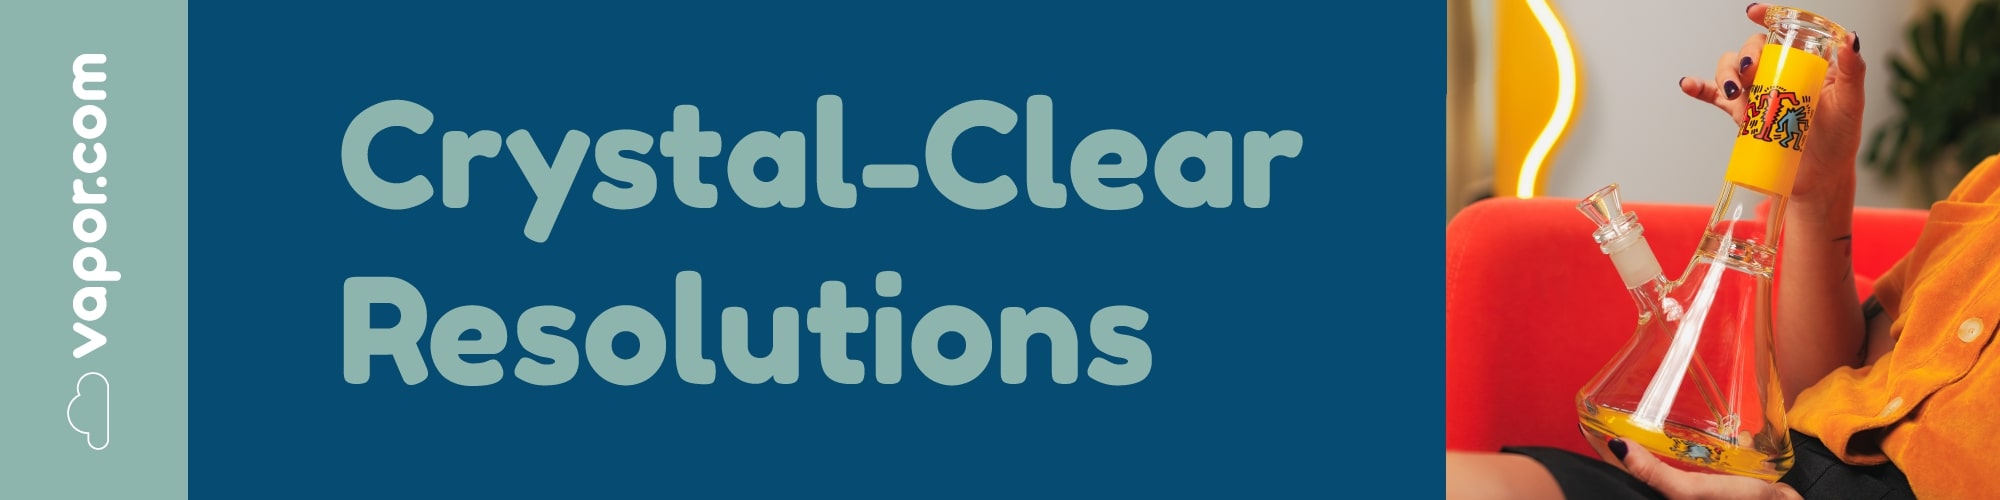 Crystal-Clear Resolutions: Upgrading Your Glass Collection